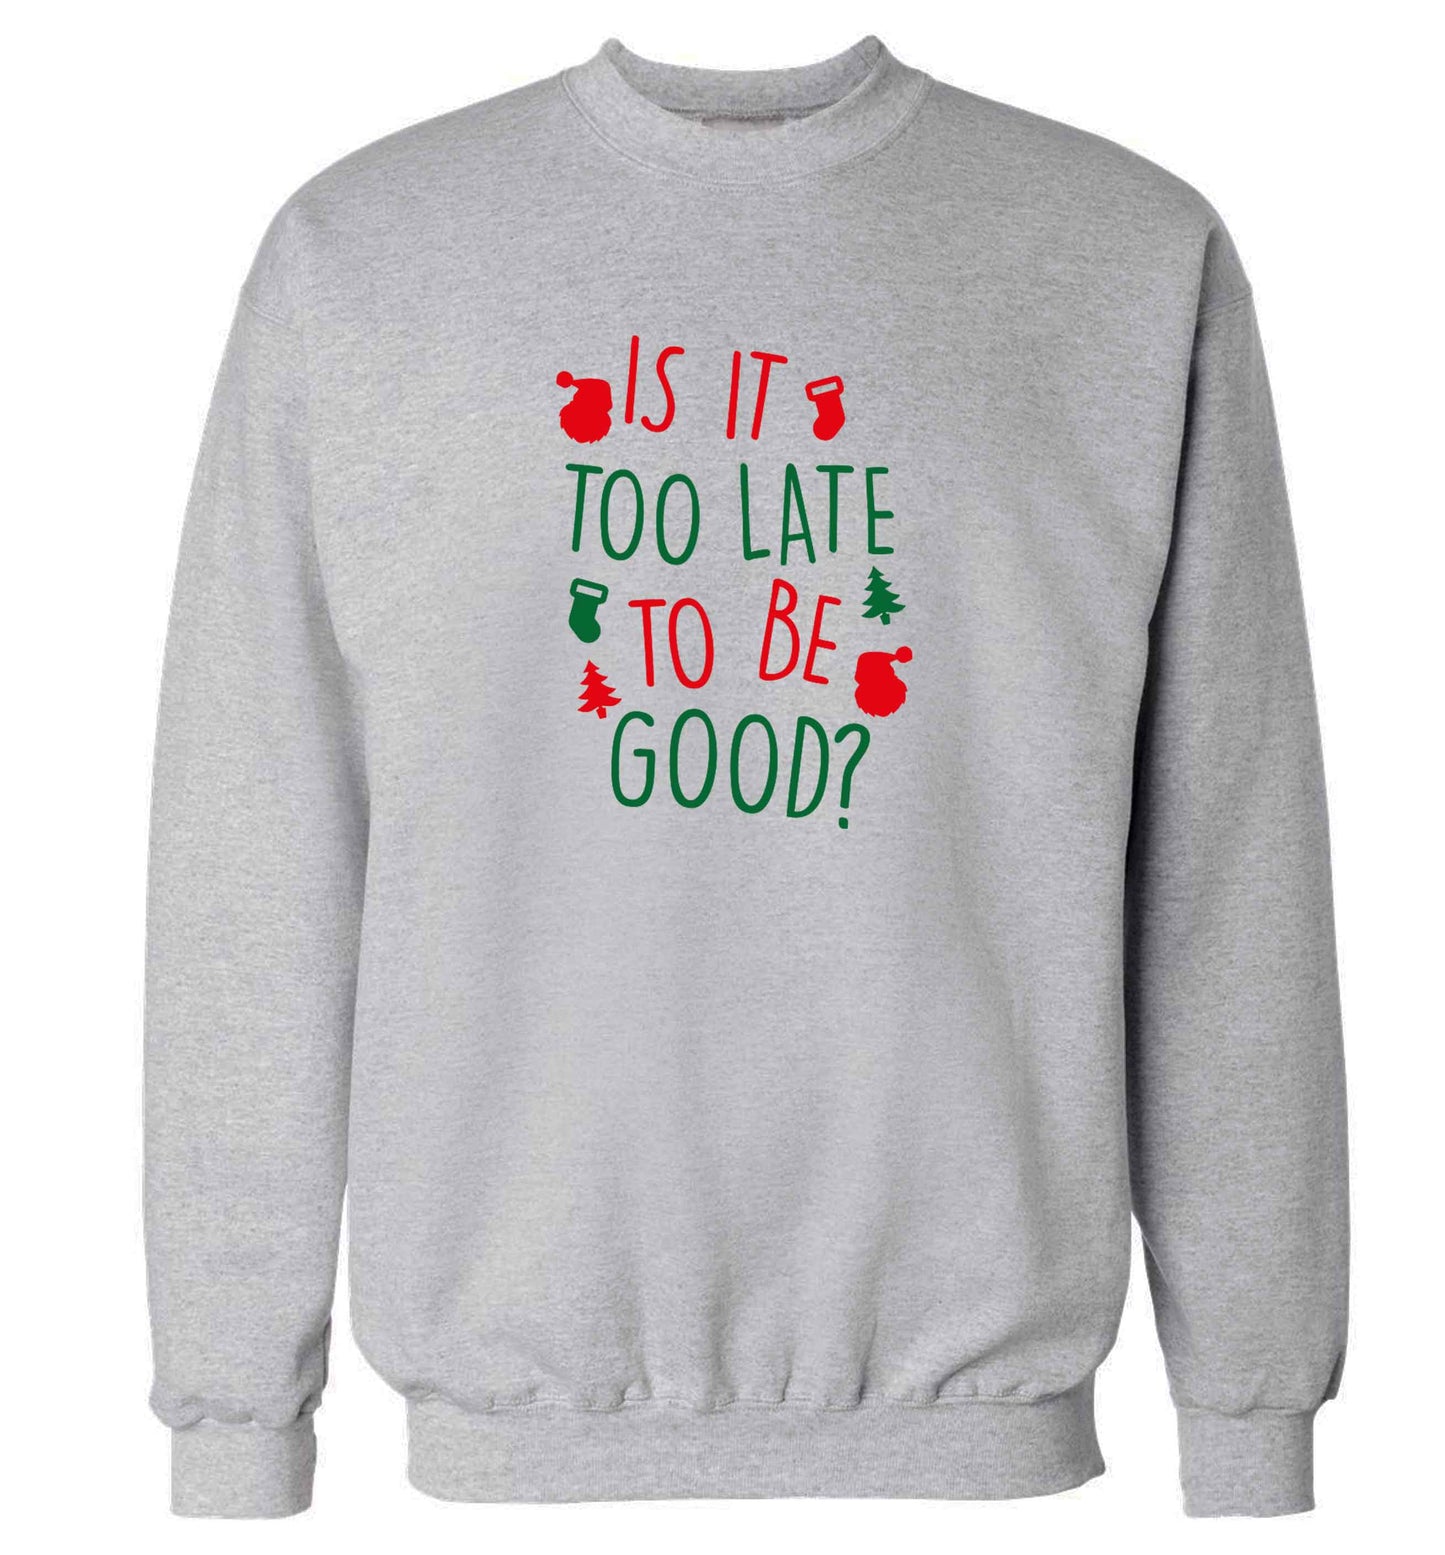 Too Late to be Good adult's unisex grey sweater 2XL